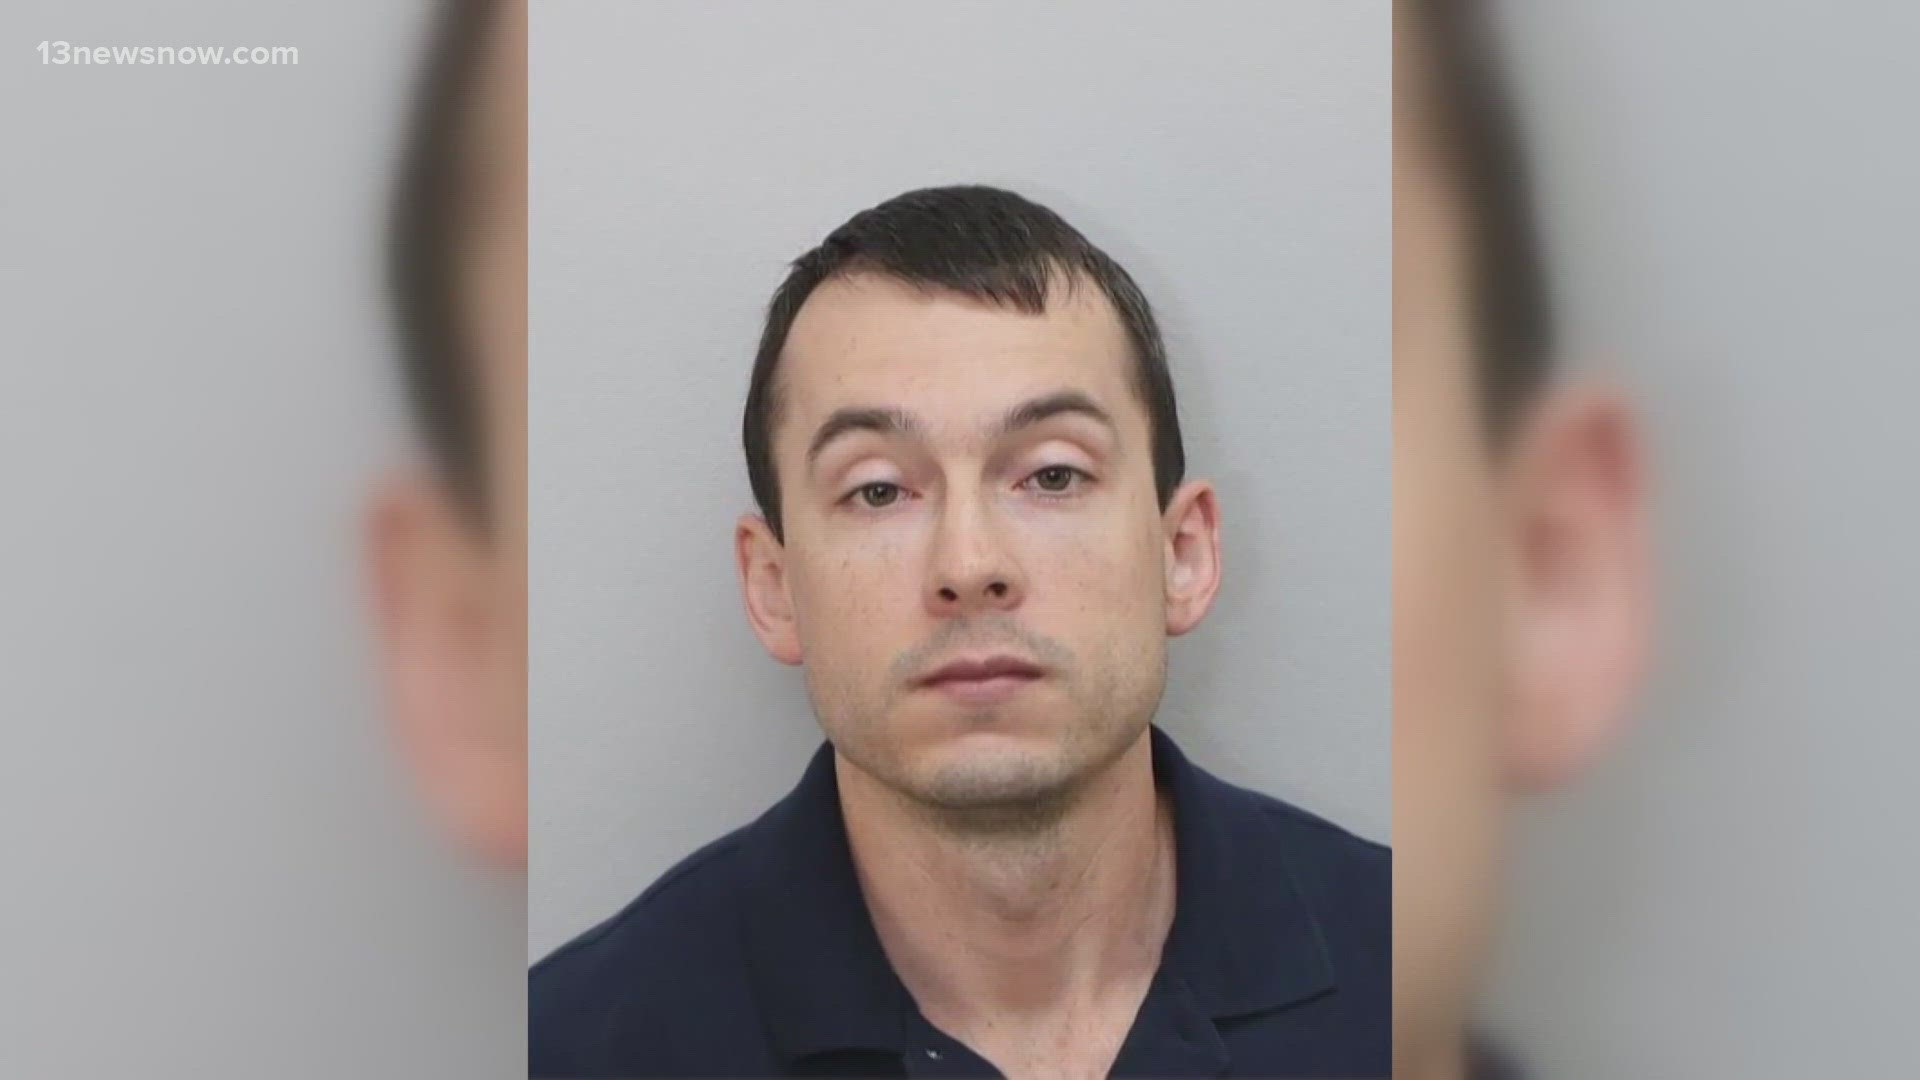 Xxx Video Chsild - Man facing child porn charges in Virginia Beach appears in court |  13newsnow.com